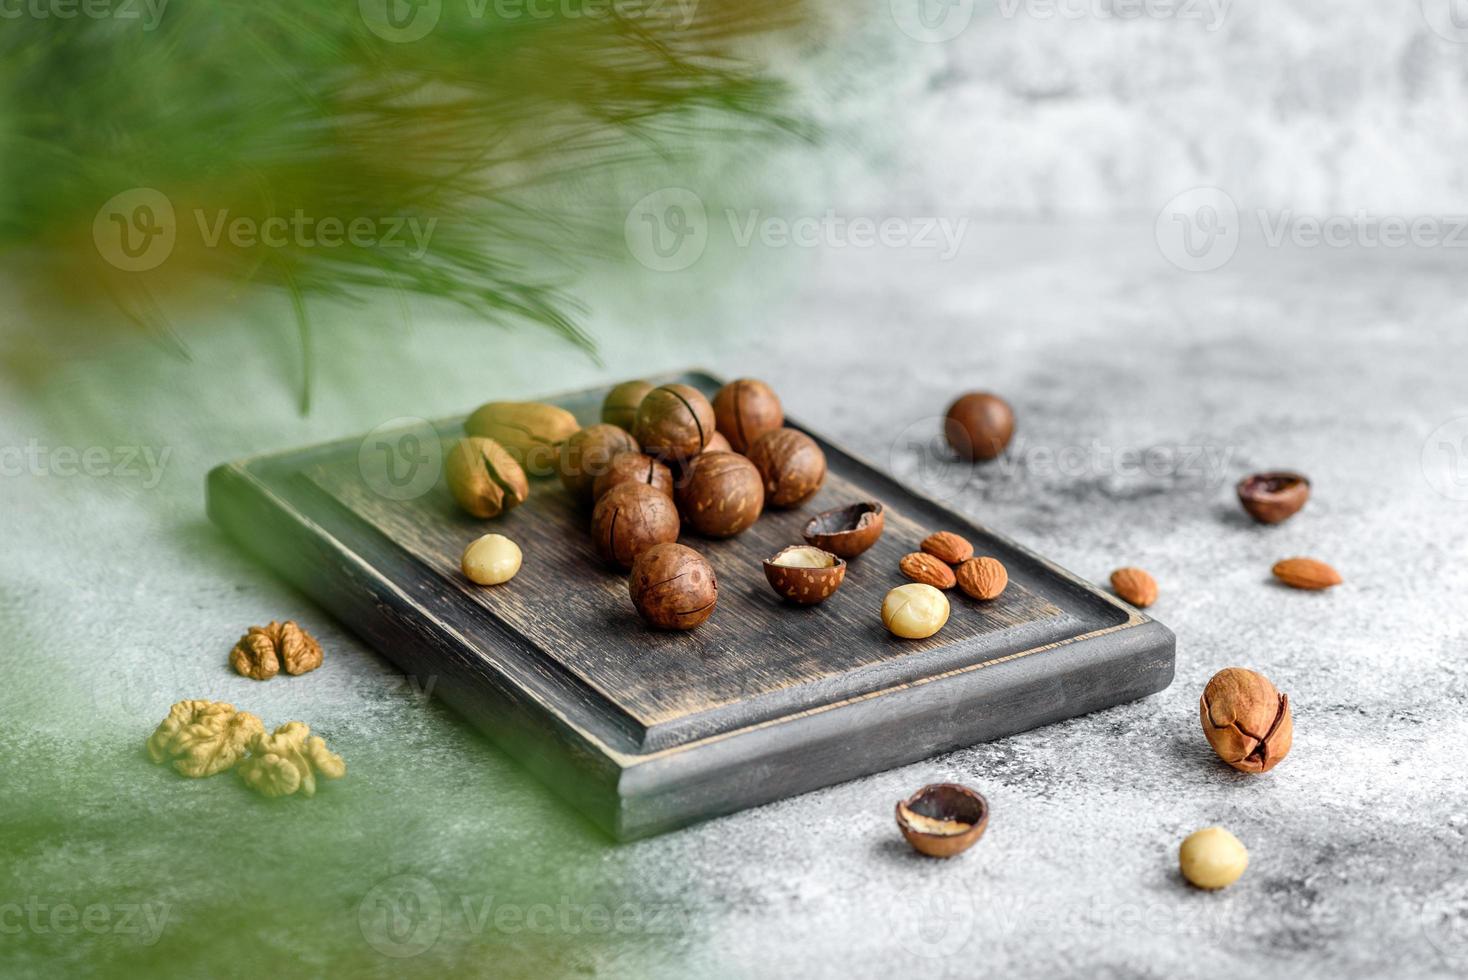 Several types of nuts against the background photo